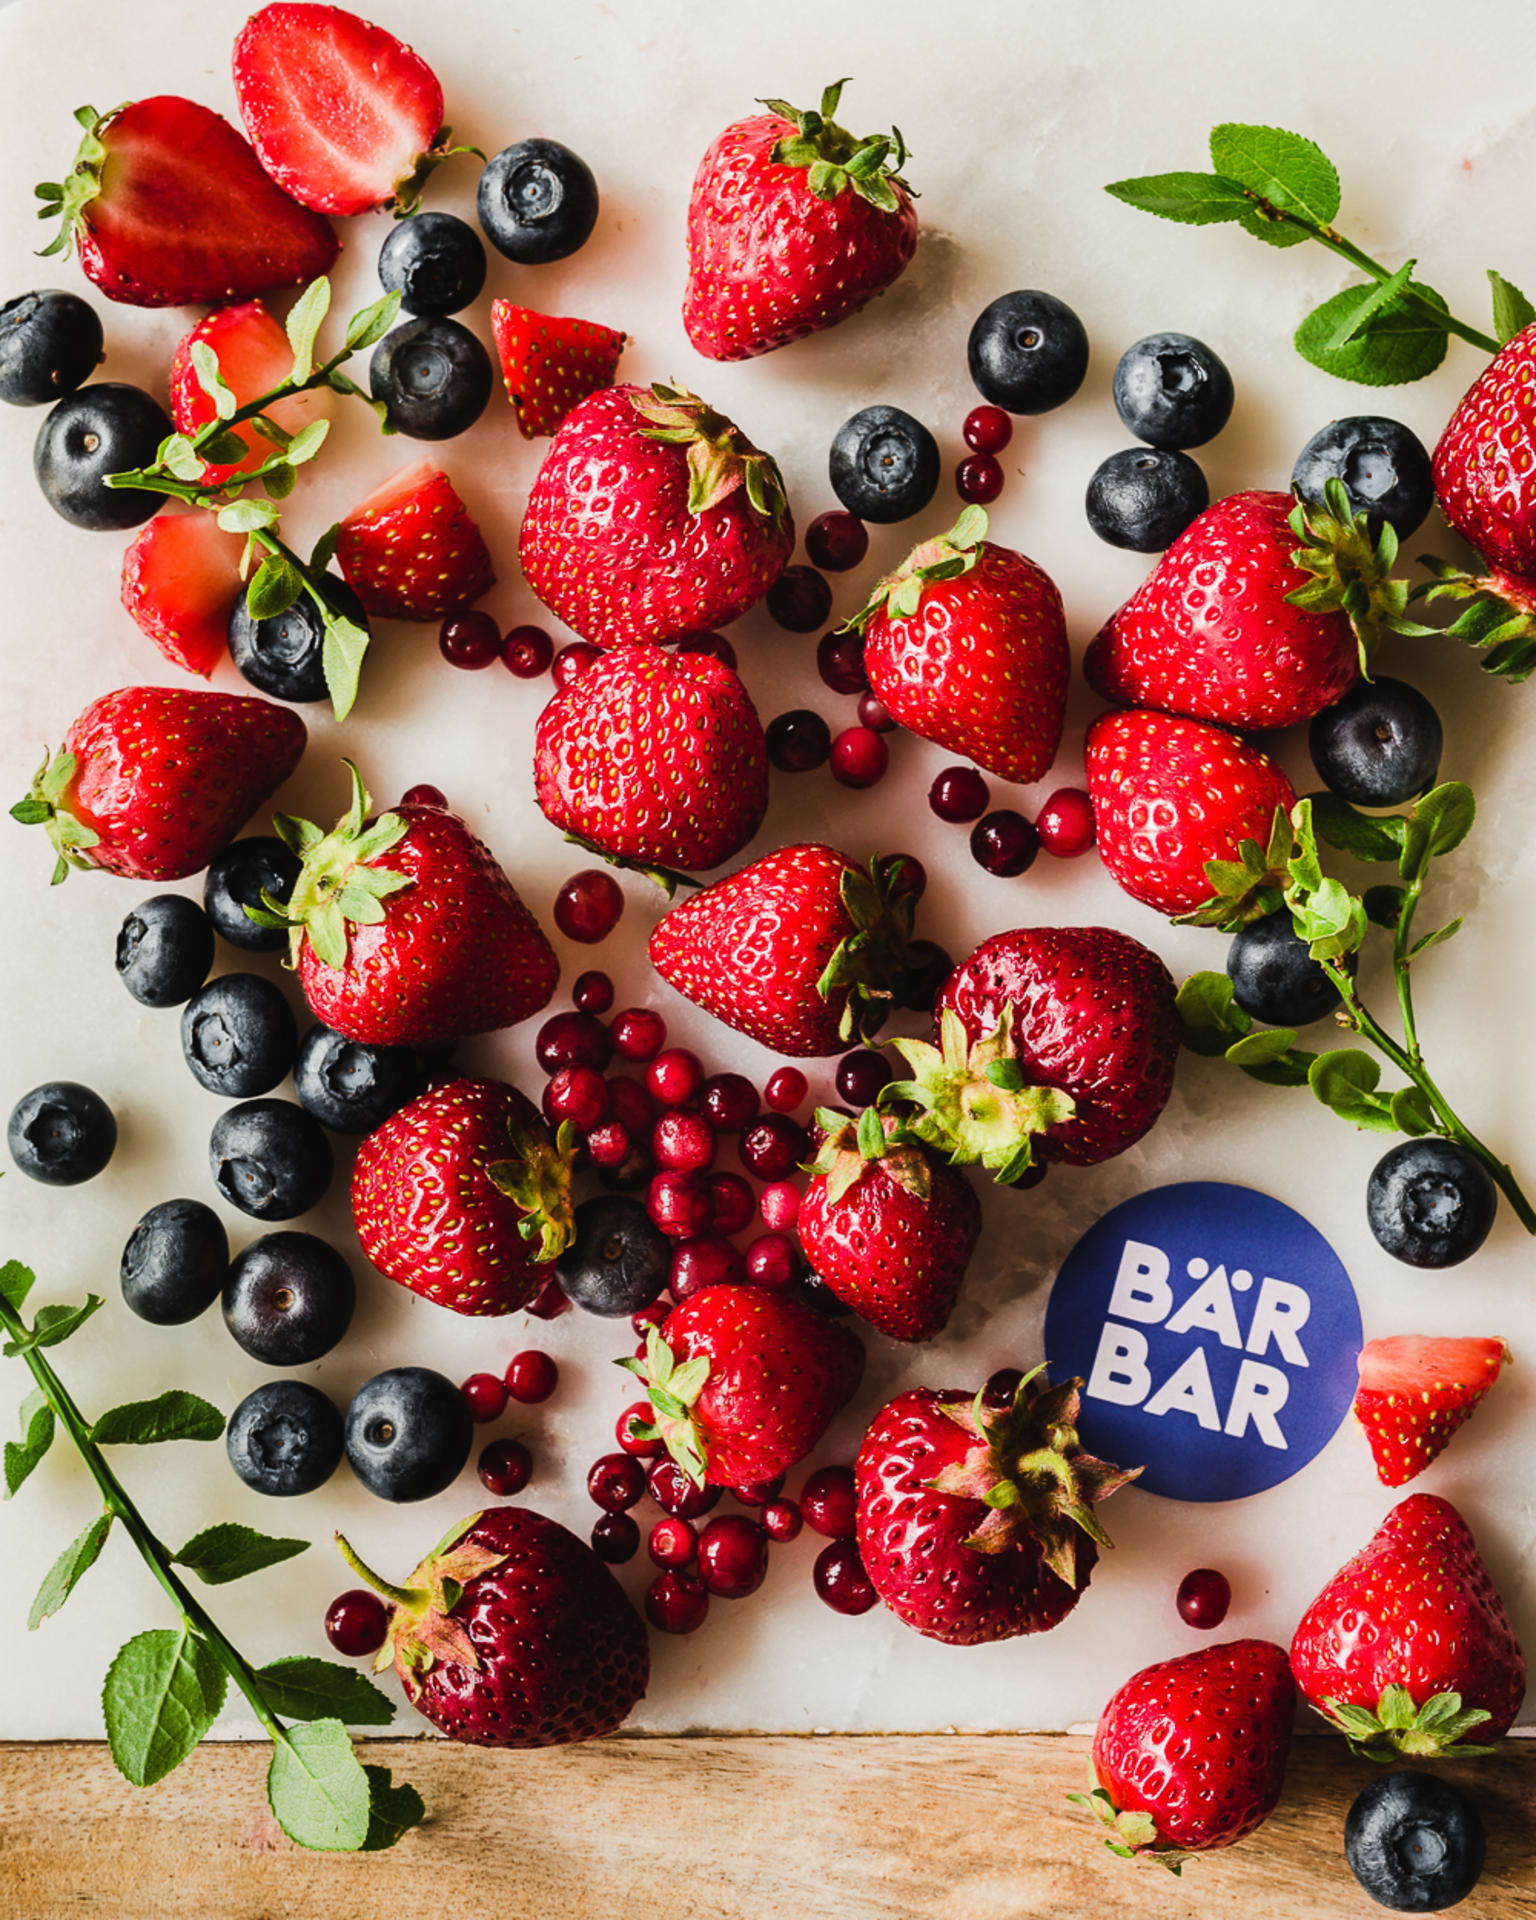 Berries and logo